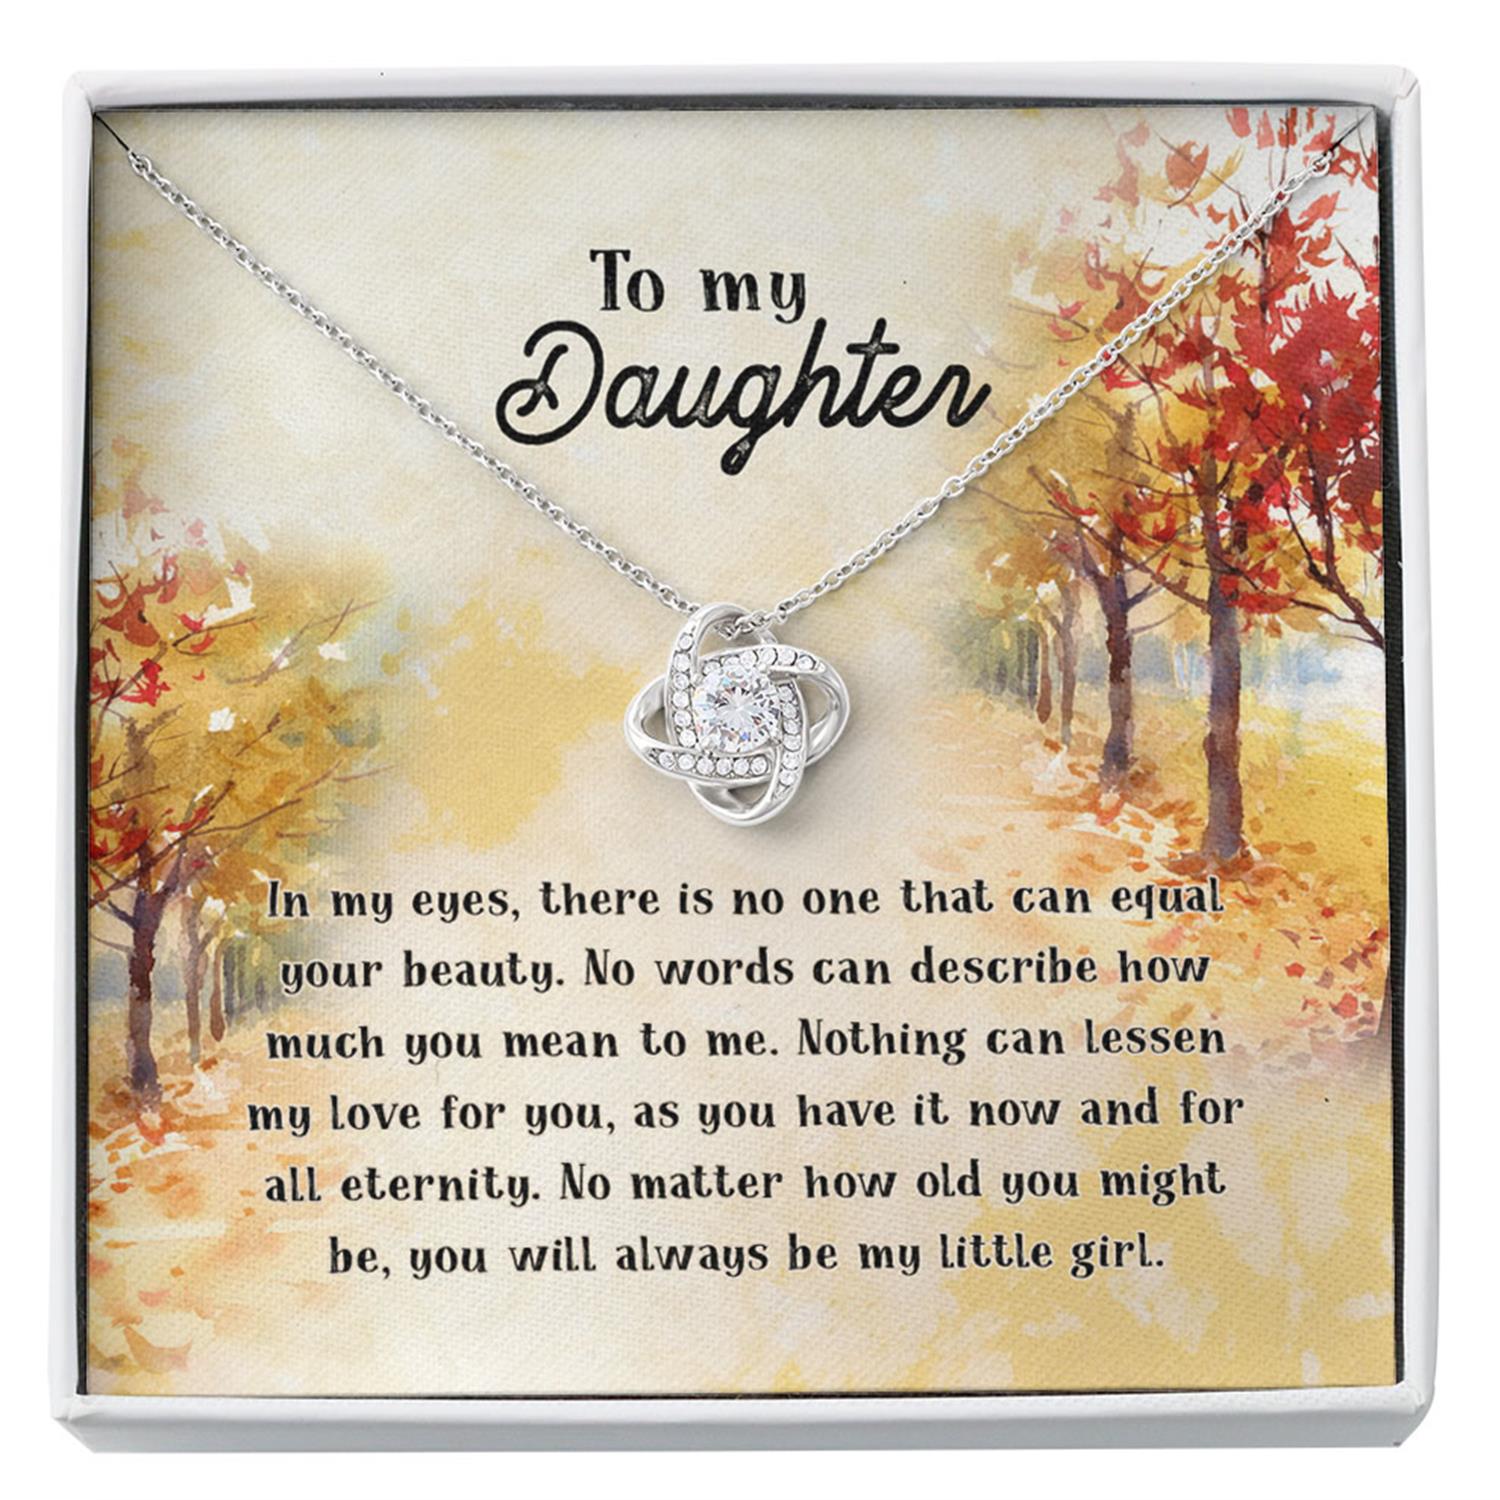 Daughter Necklace, To My Daughter "Equal Your Beauty - Fall" Love Knot Necklace Gift From Dad Mom Custom Necklace